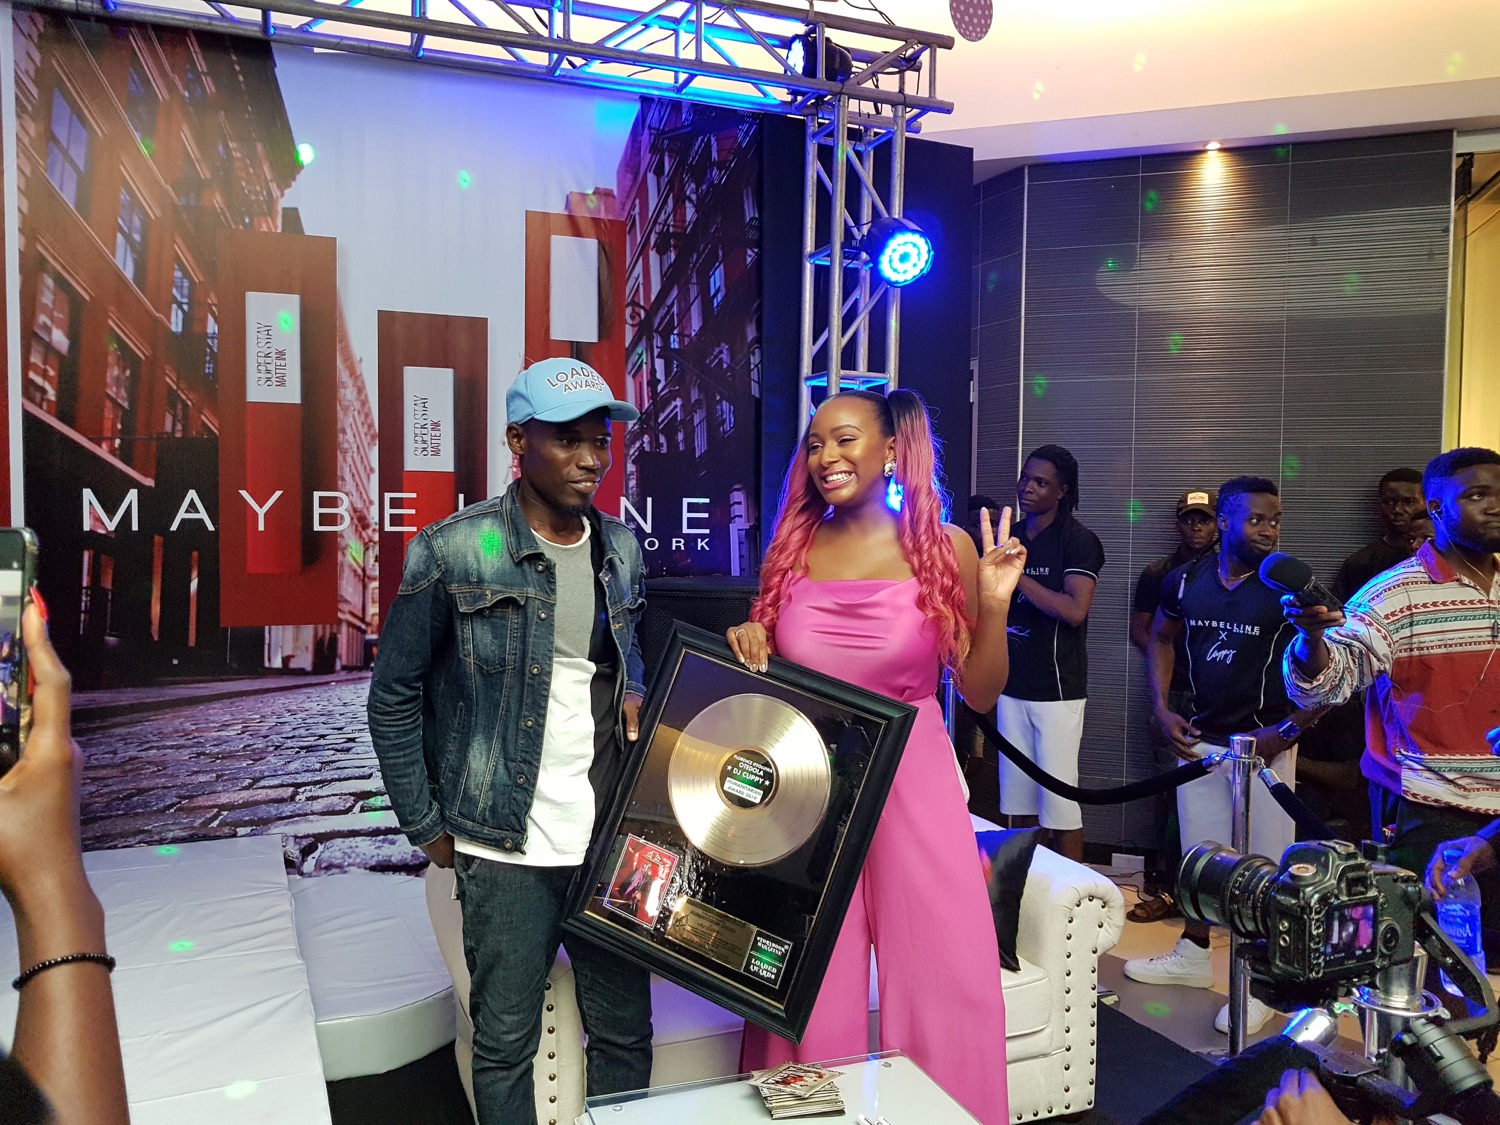 jaiyeorie + #MaybellinexCuppyLive DJ Cuppy Parties with @Maybelline Customers in Nigeria at  Ikeja City Mall, Lagos @cuppymusic 